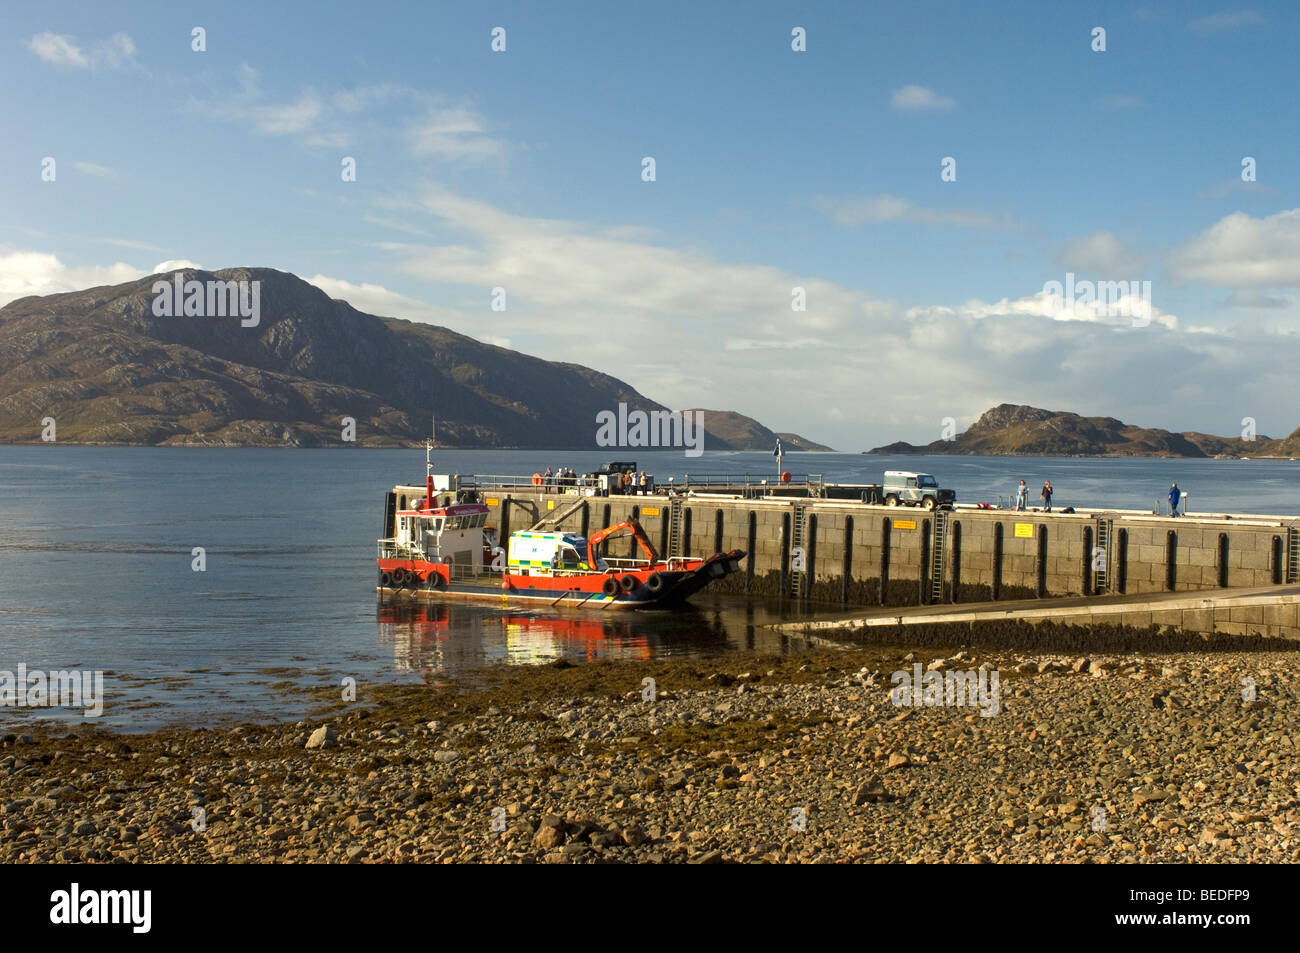 The ferry and boat landing at Inverie, Knoydart in Loch Nevis, I nverness-shire.   SCO 5369 Stock Photo